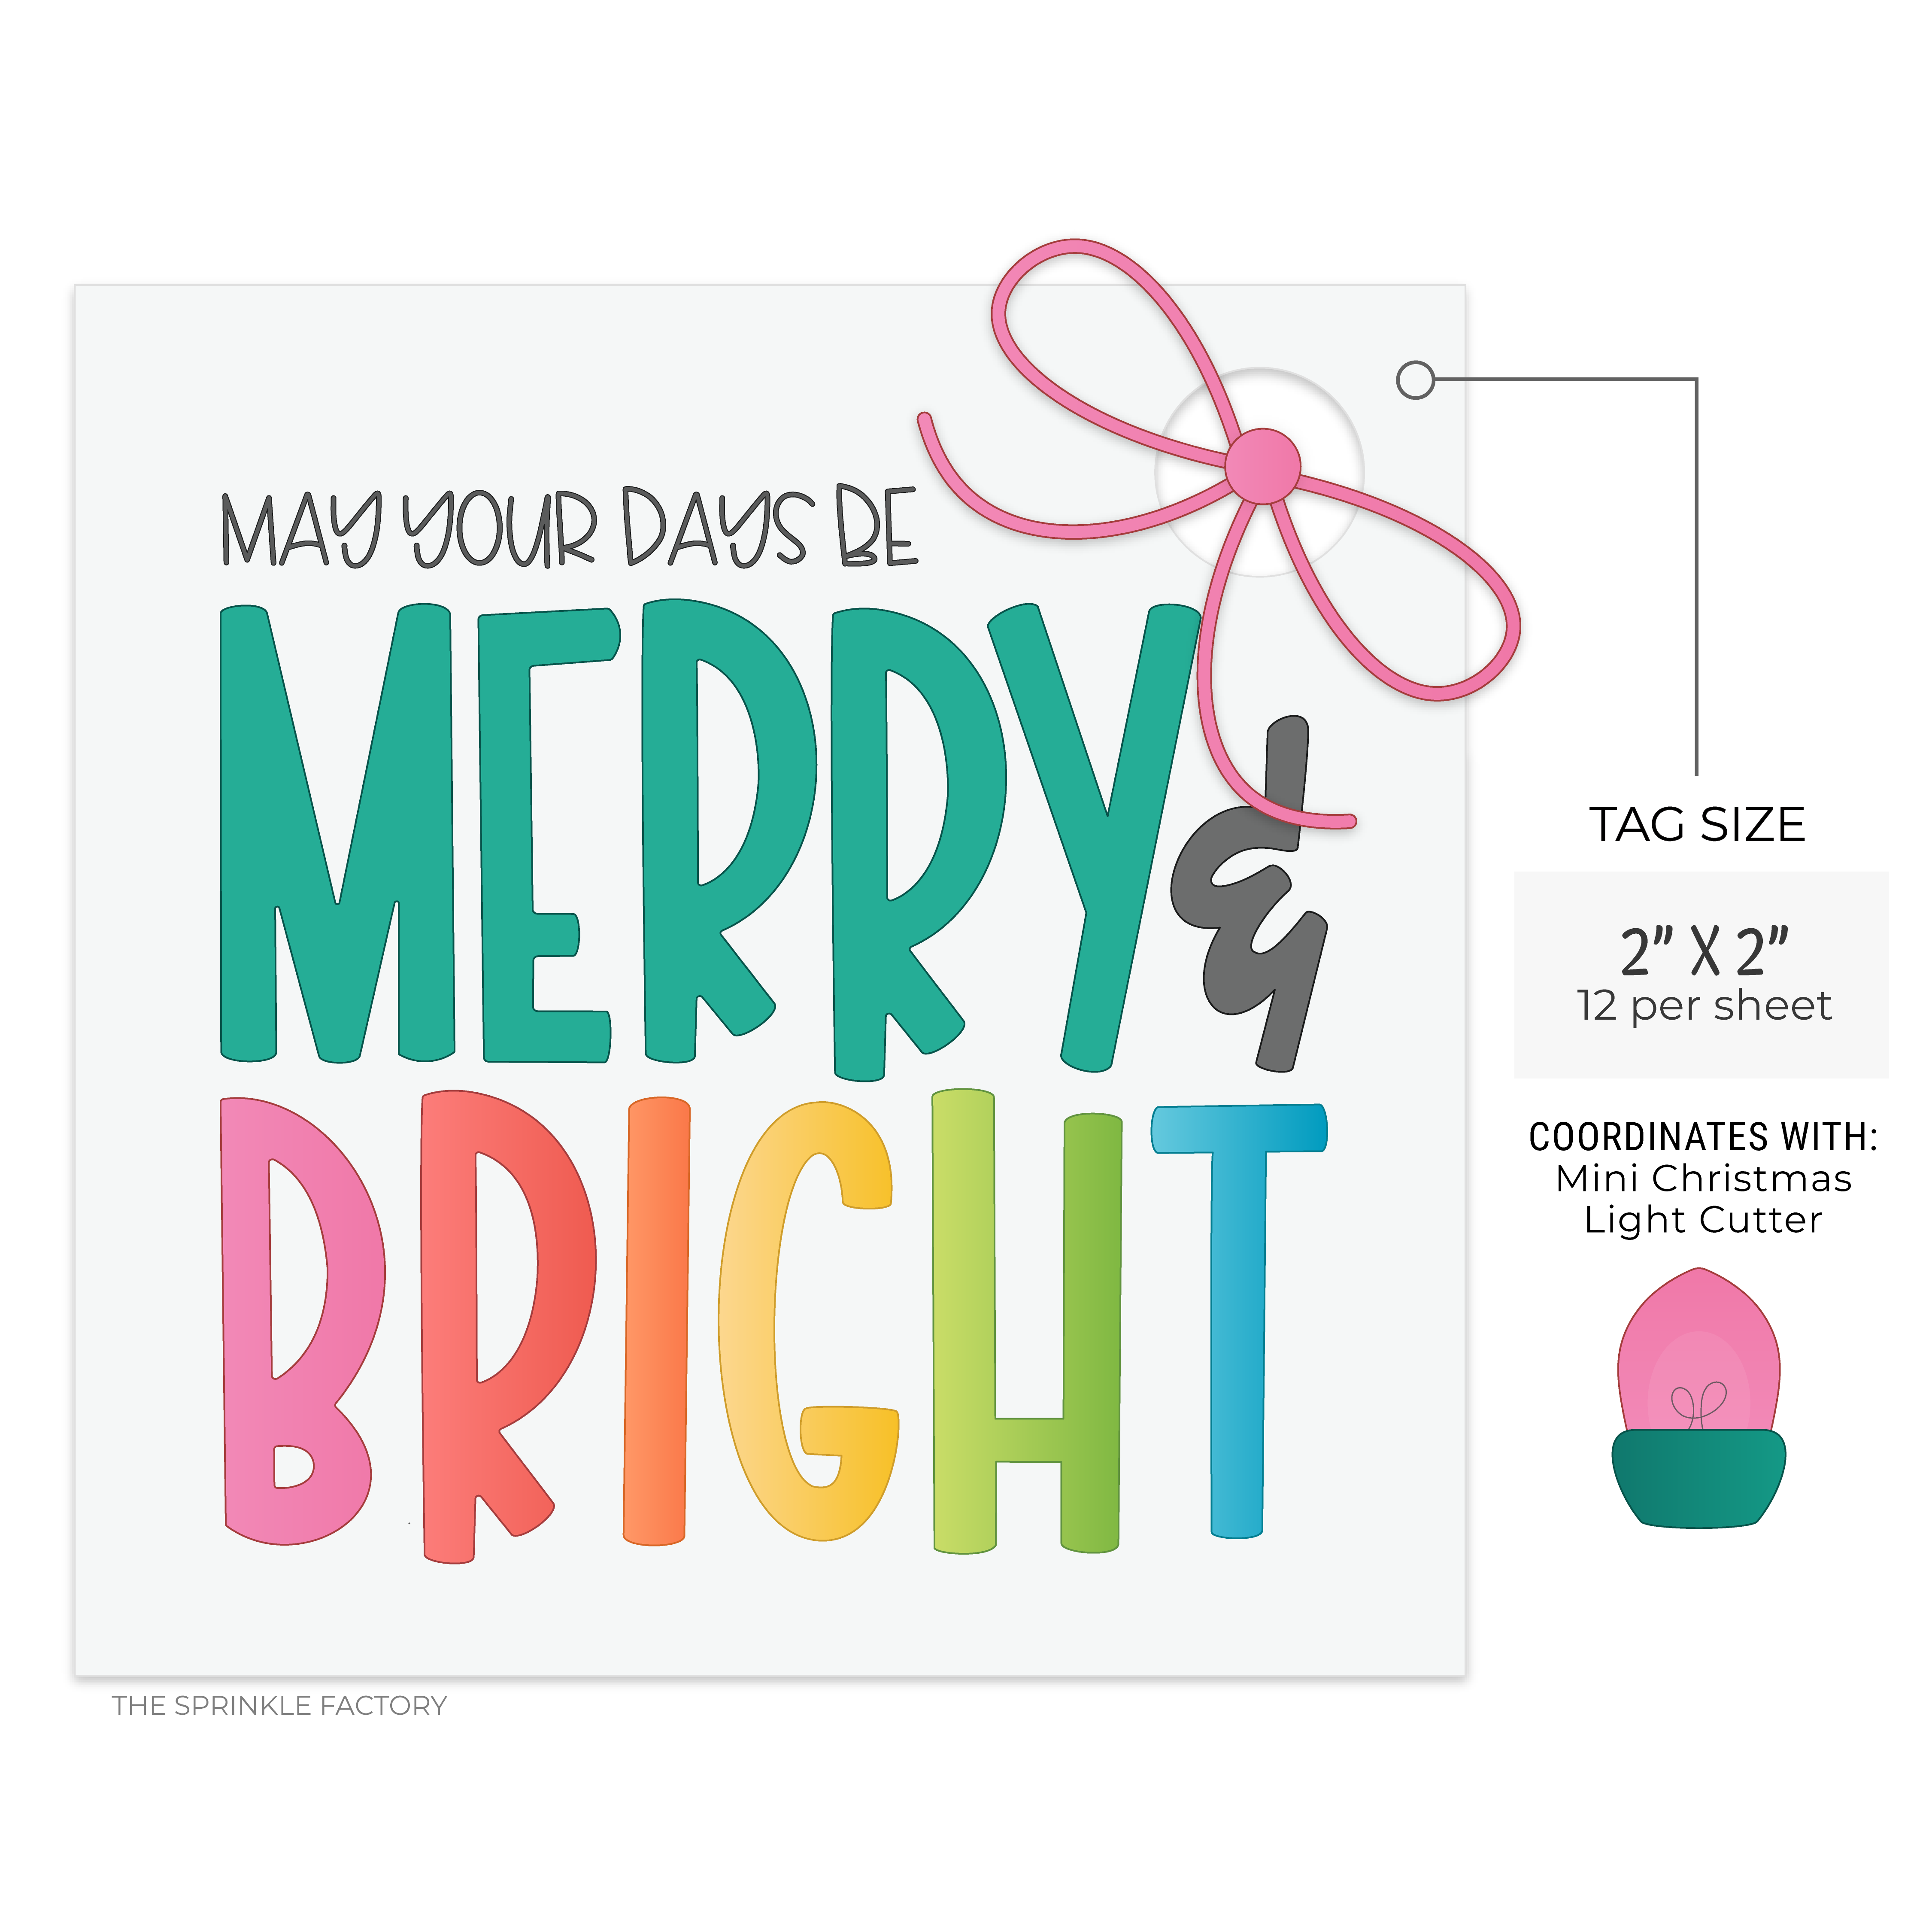 Image of a digital tag with the words may your days be merry and bright on it with a pink bow.